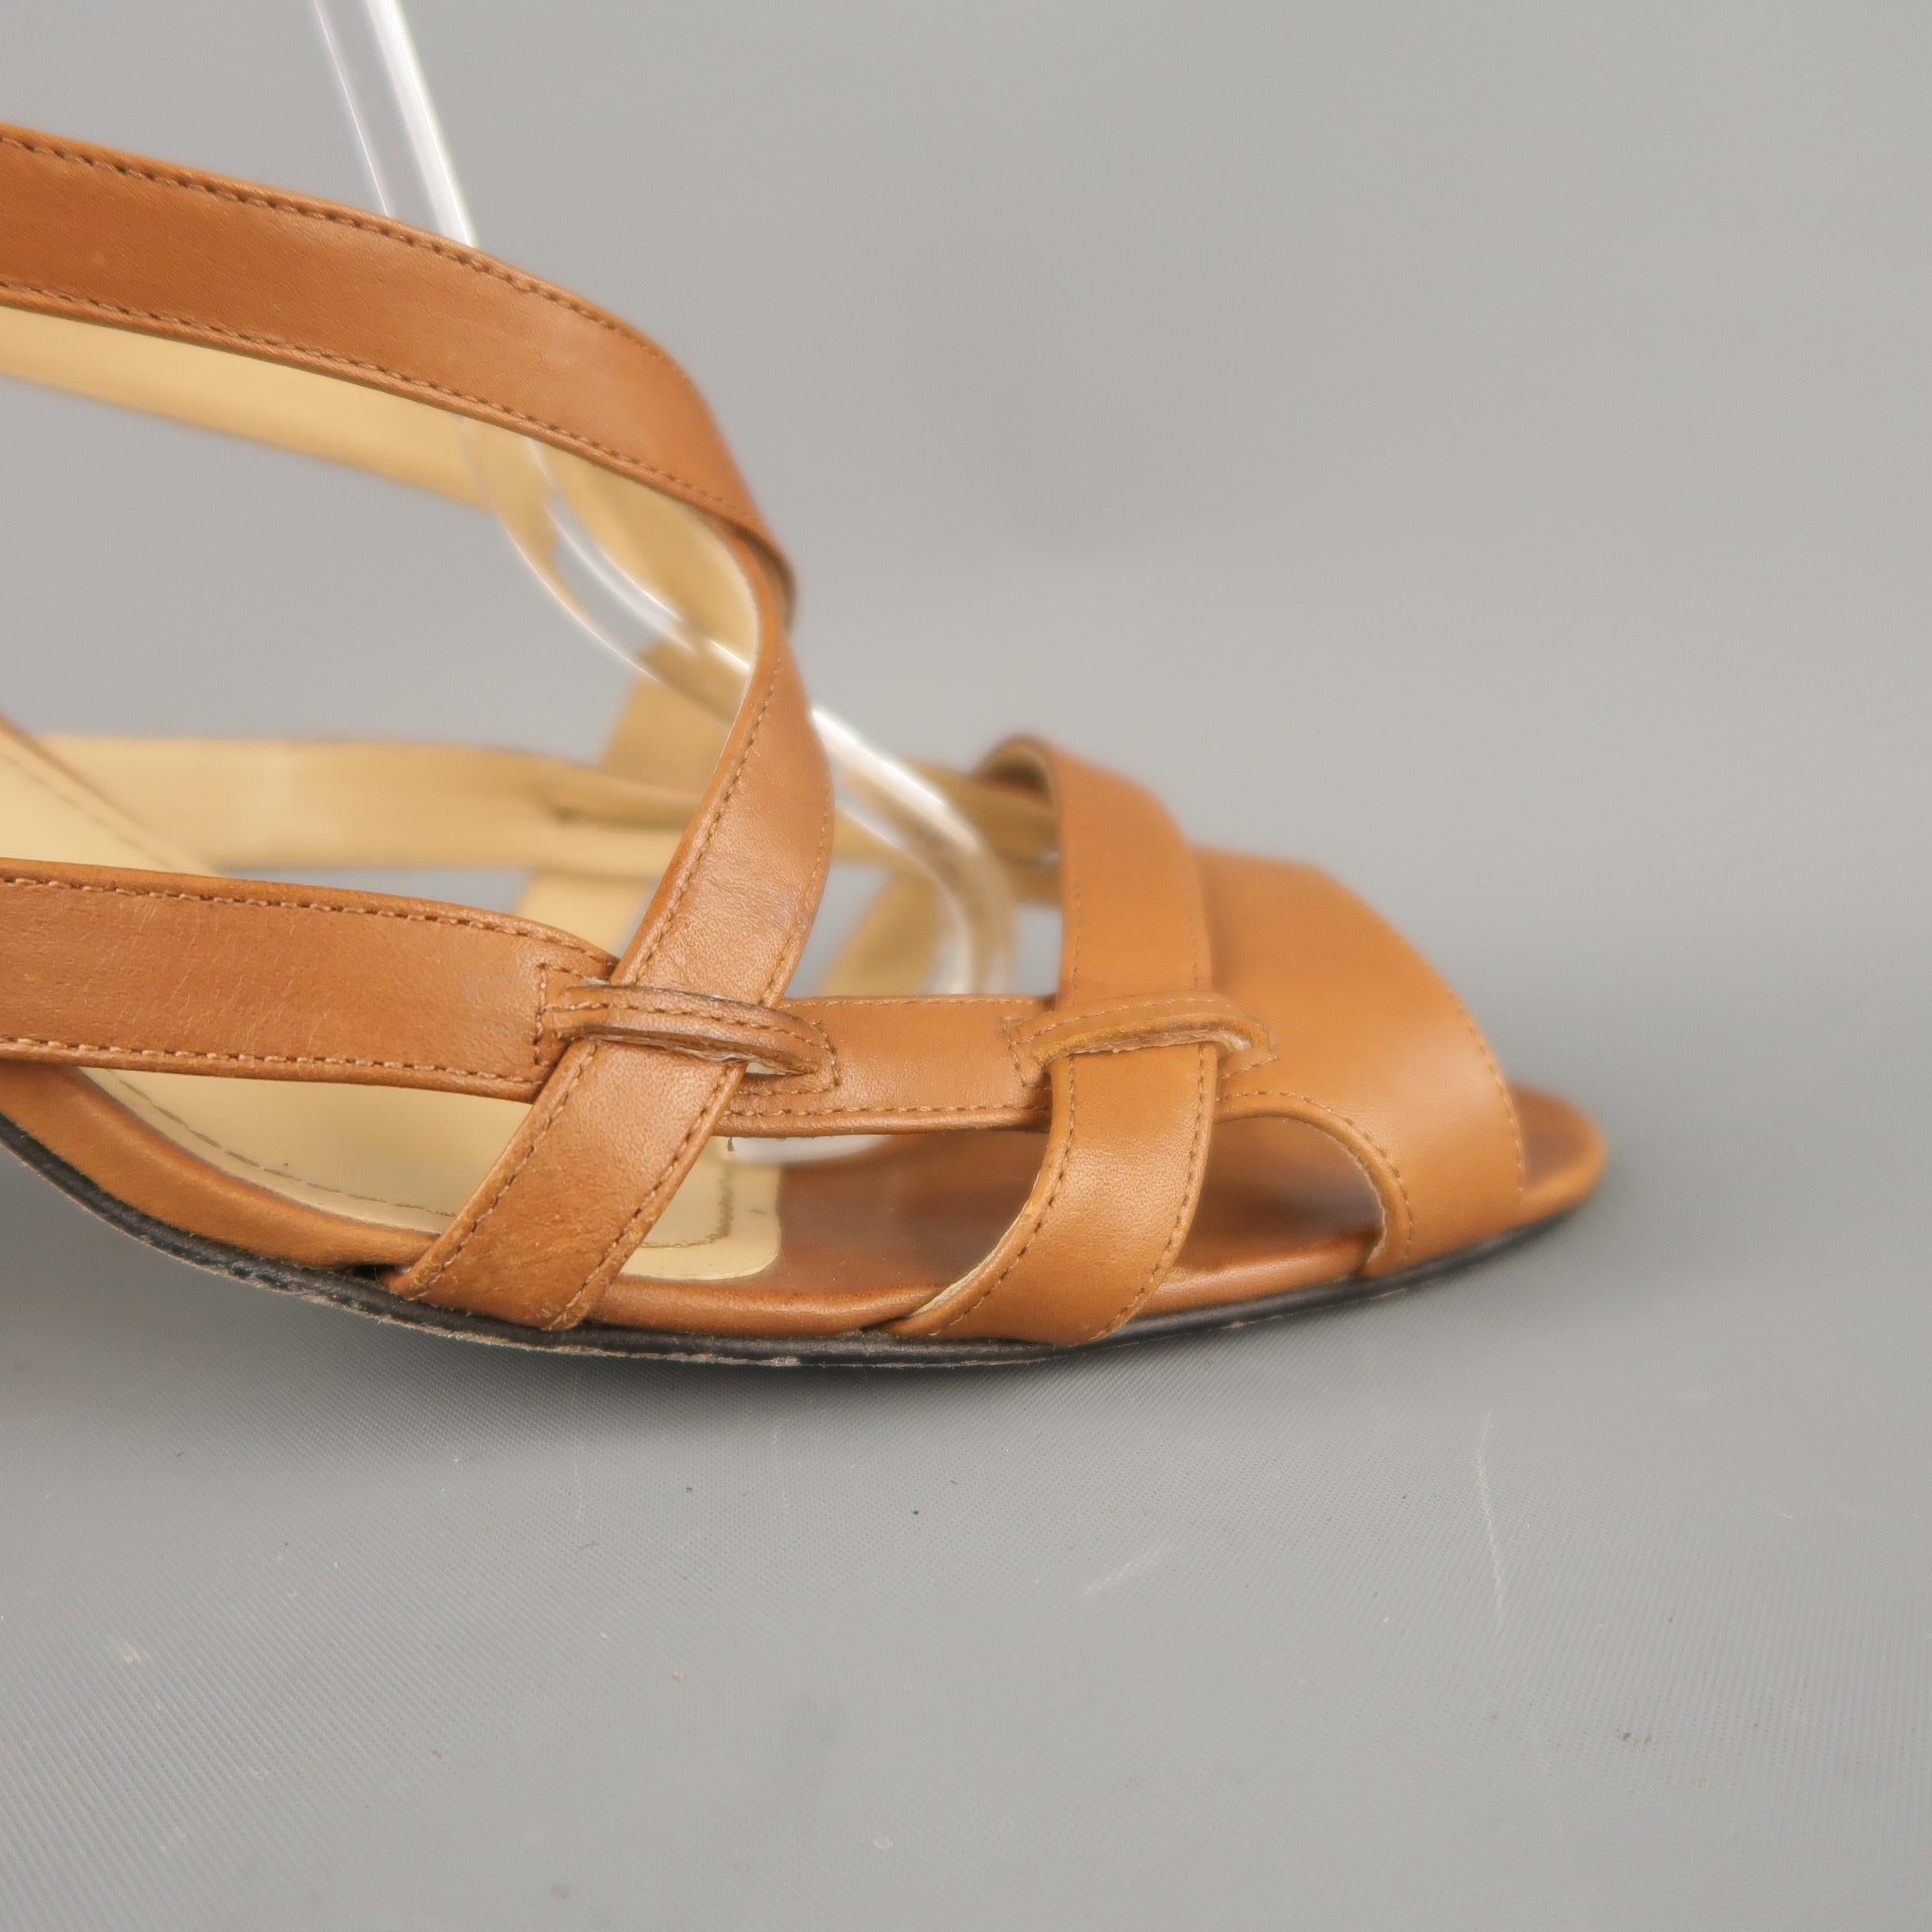 MANOLO BLAHNIK sandals come in light tan brown leather with a strappy peep toe, crossed strap and covered heel with ankle strap. Made in Italy.
 
Good Pre-Owned Condition.
Marked: IT 42
 
Measurements:
 
Heel: 3 in.